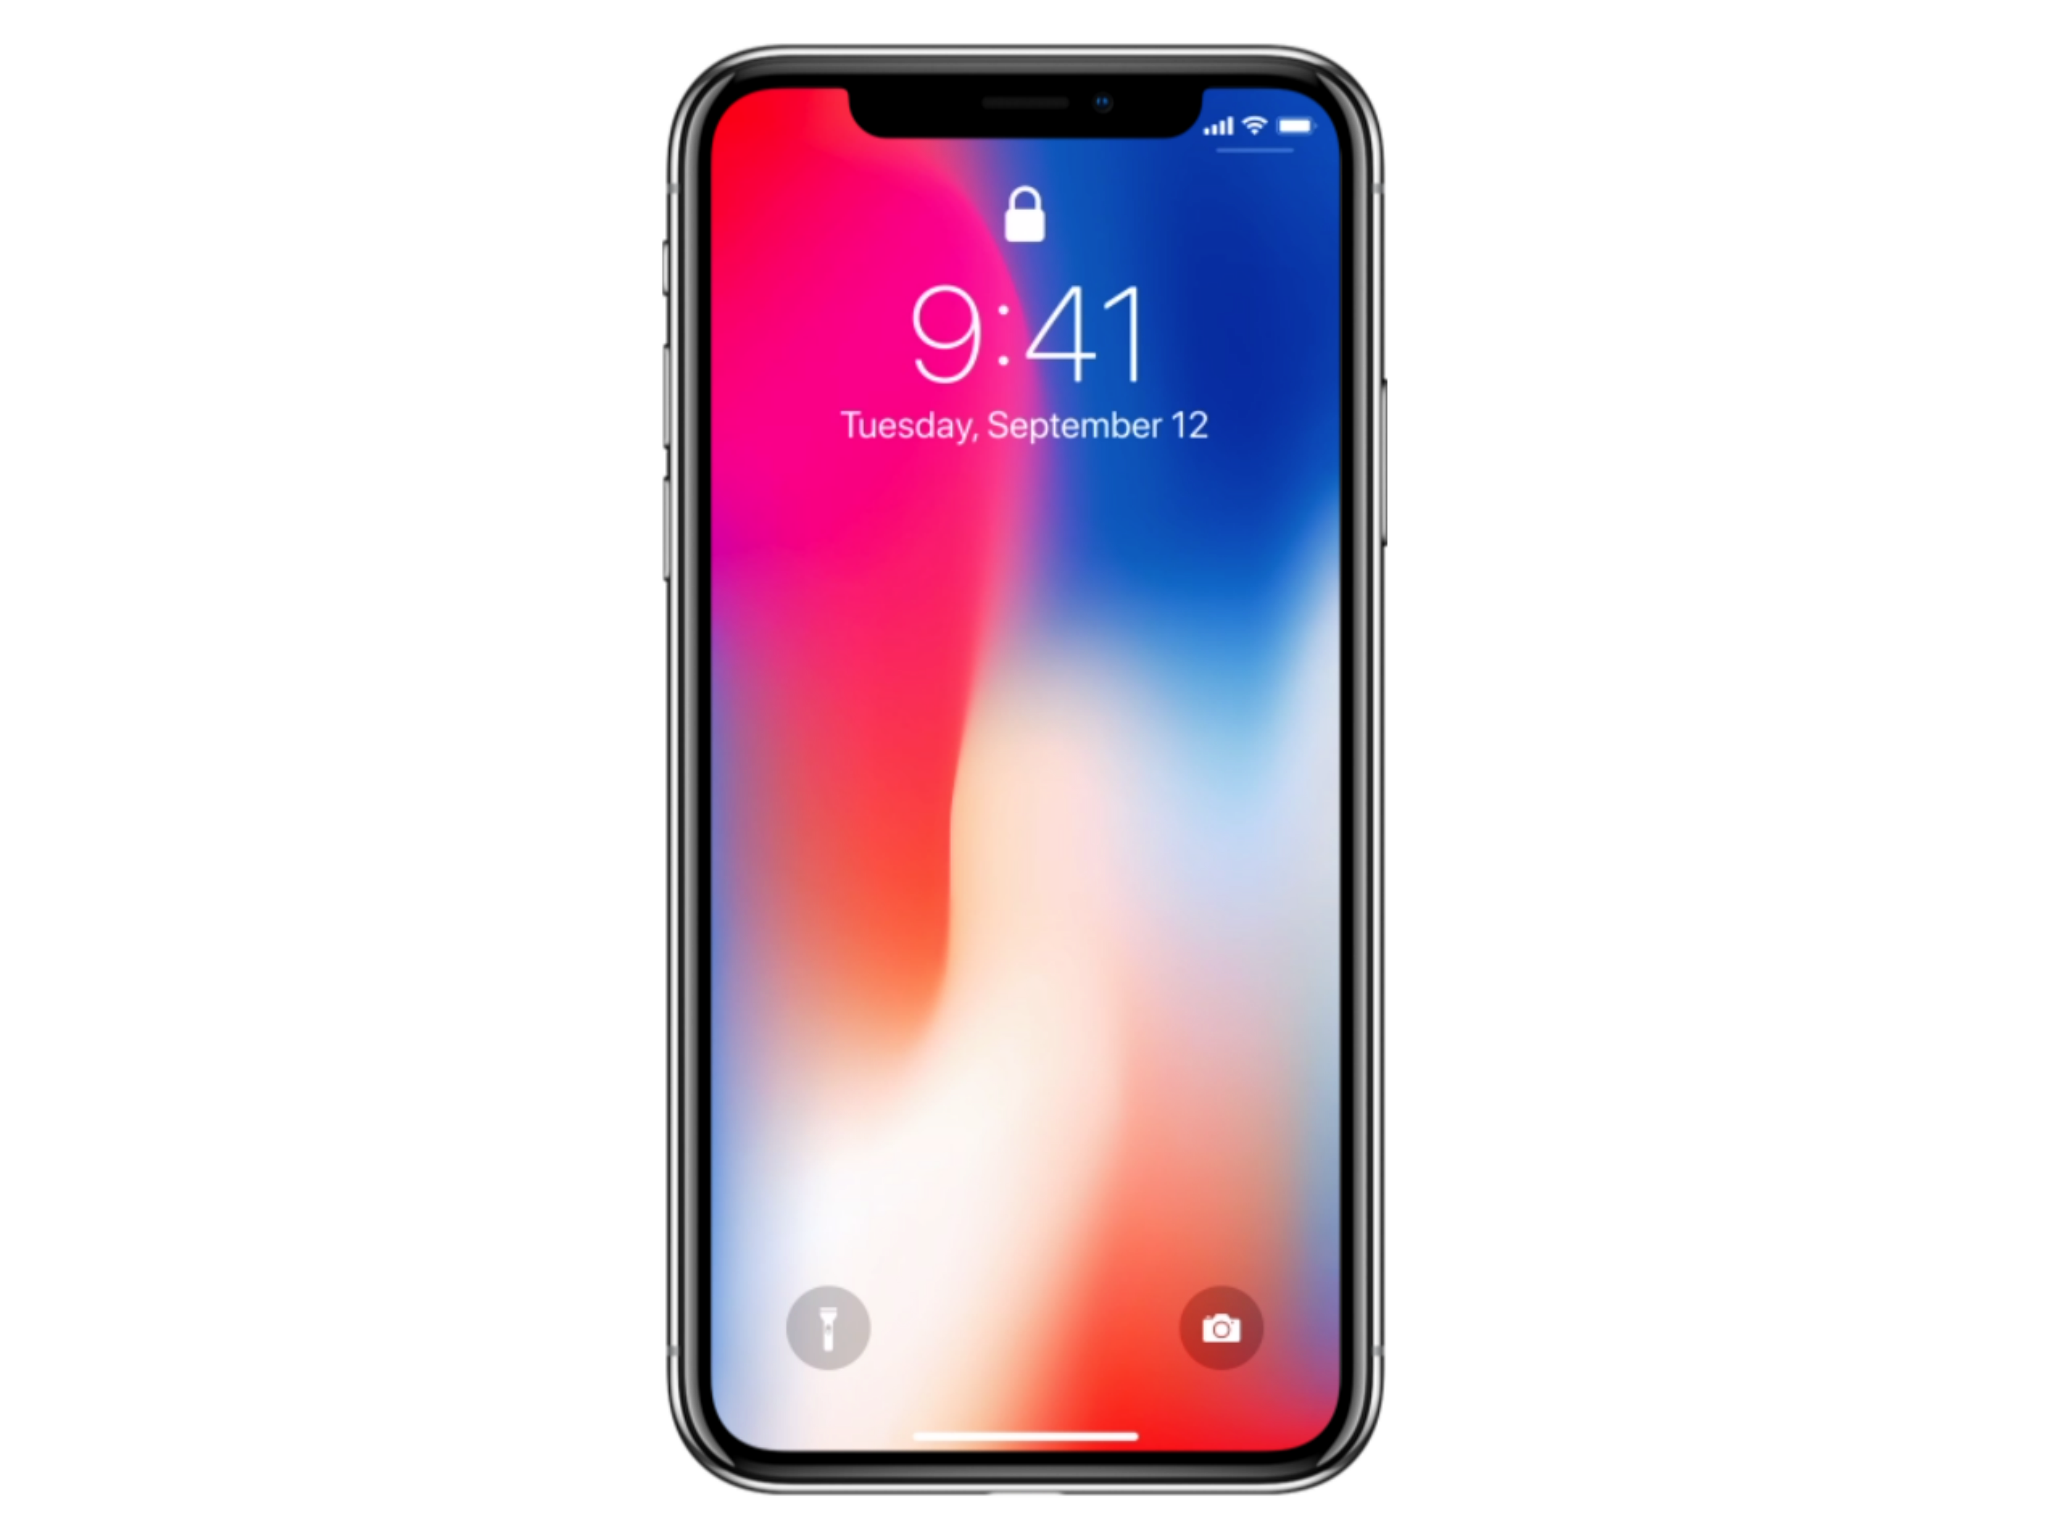 Iphone X Features A Leap Forward For Apple But Samsung Is